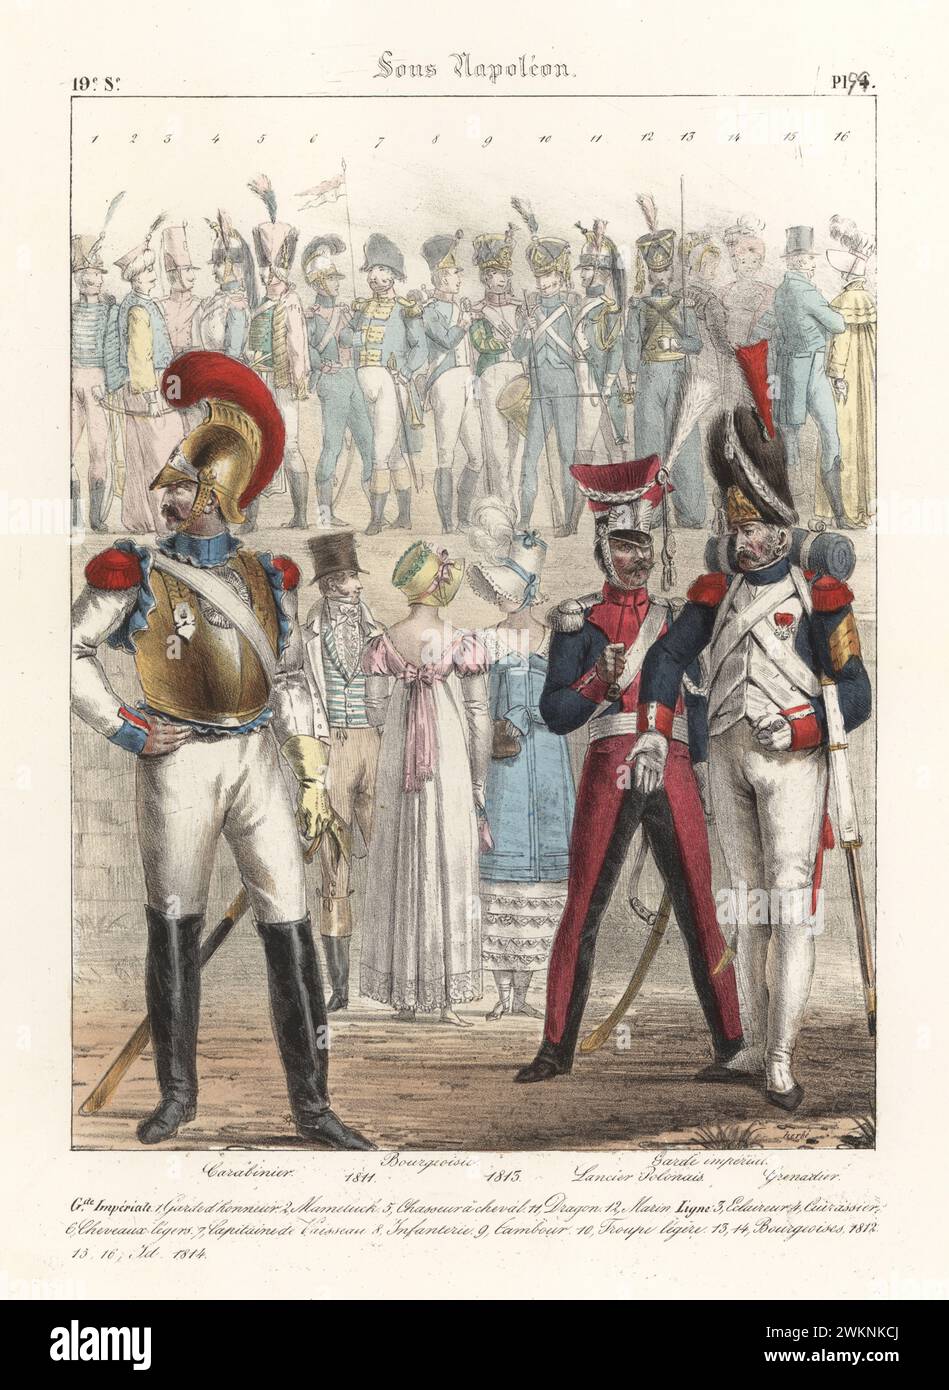 French military uniforms of the First Empire, 19th century. French Horse Carabinier in brass helmet and cuirass, Polish Lancer and Imperial Guardsman, with bourgeois citizens. Carabinier, Bourgeoisie, Lancier Polonais, Garde Imperial, Grenadier. Sous Napoleon. Handcoloured lithograph by Godard after an illustration by Charles Auguste Herbé from his own Costumes Francais, Civils, Militaires et Religieux, French Costumes, Civil, Military and Religious, Maison Martinet, Paris, 1837. Stock Photo